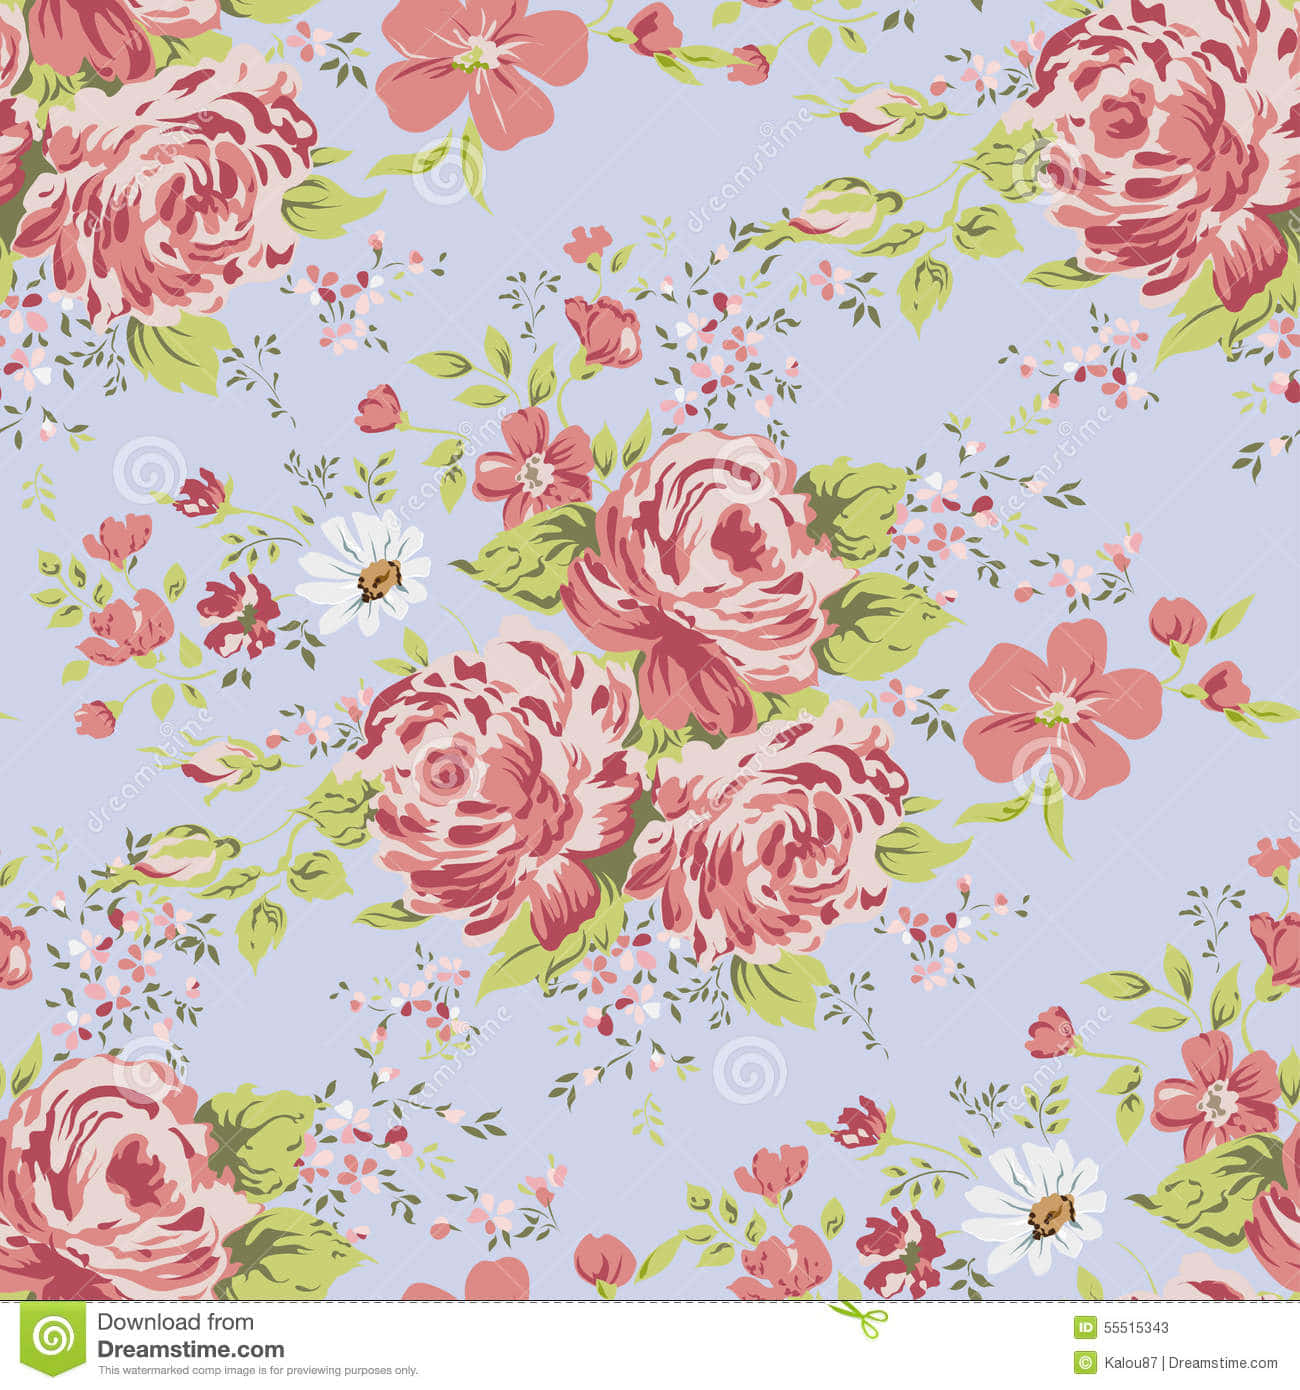 Floral Pattern With Pink Roses On A Blue Background Wallpaper